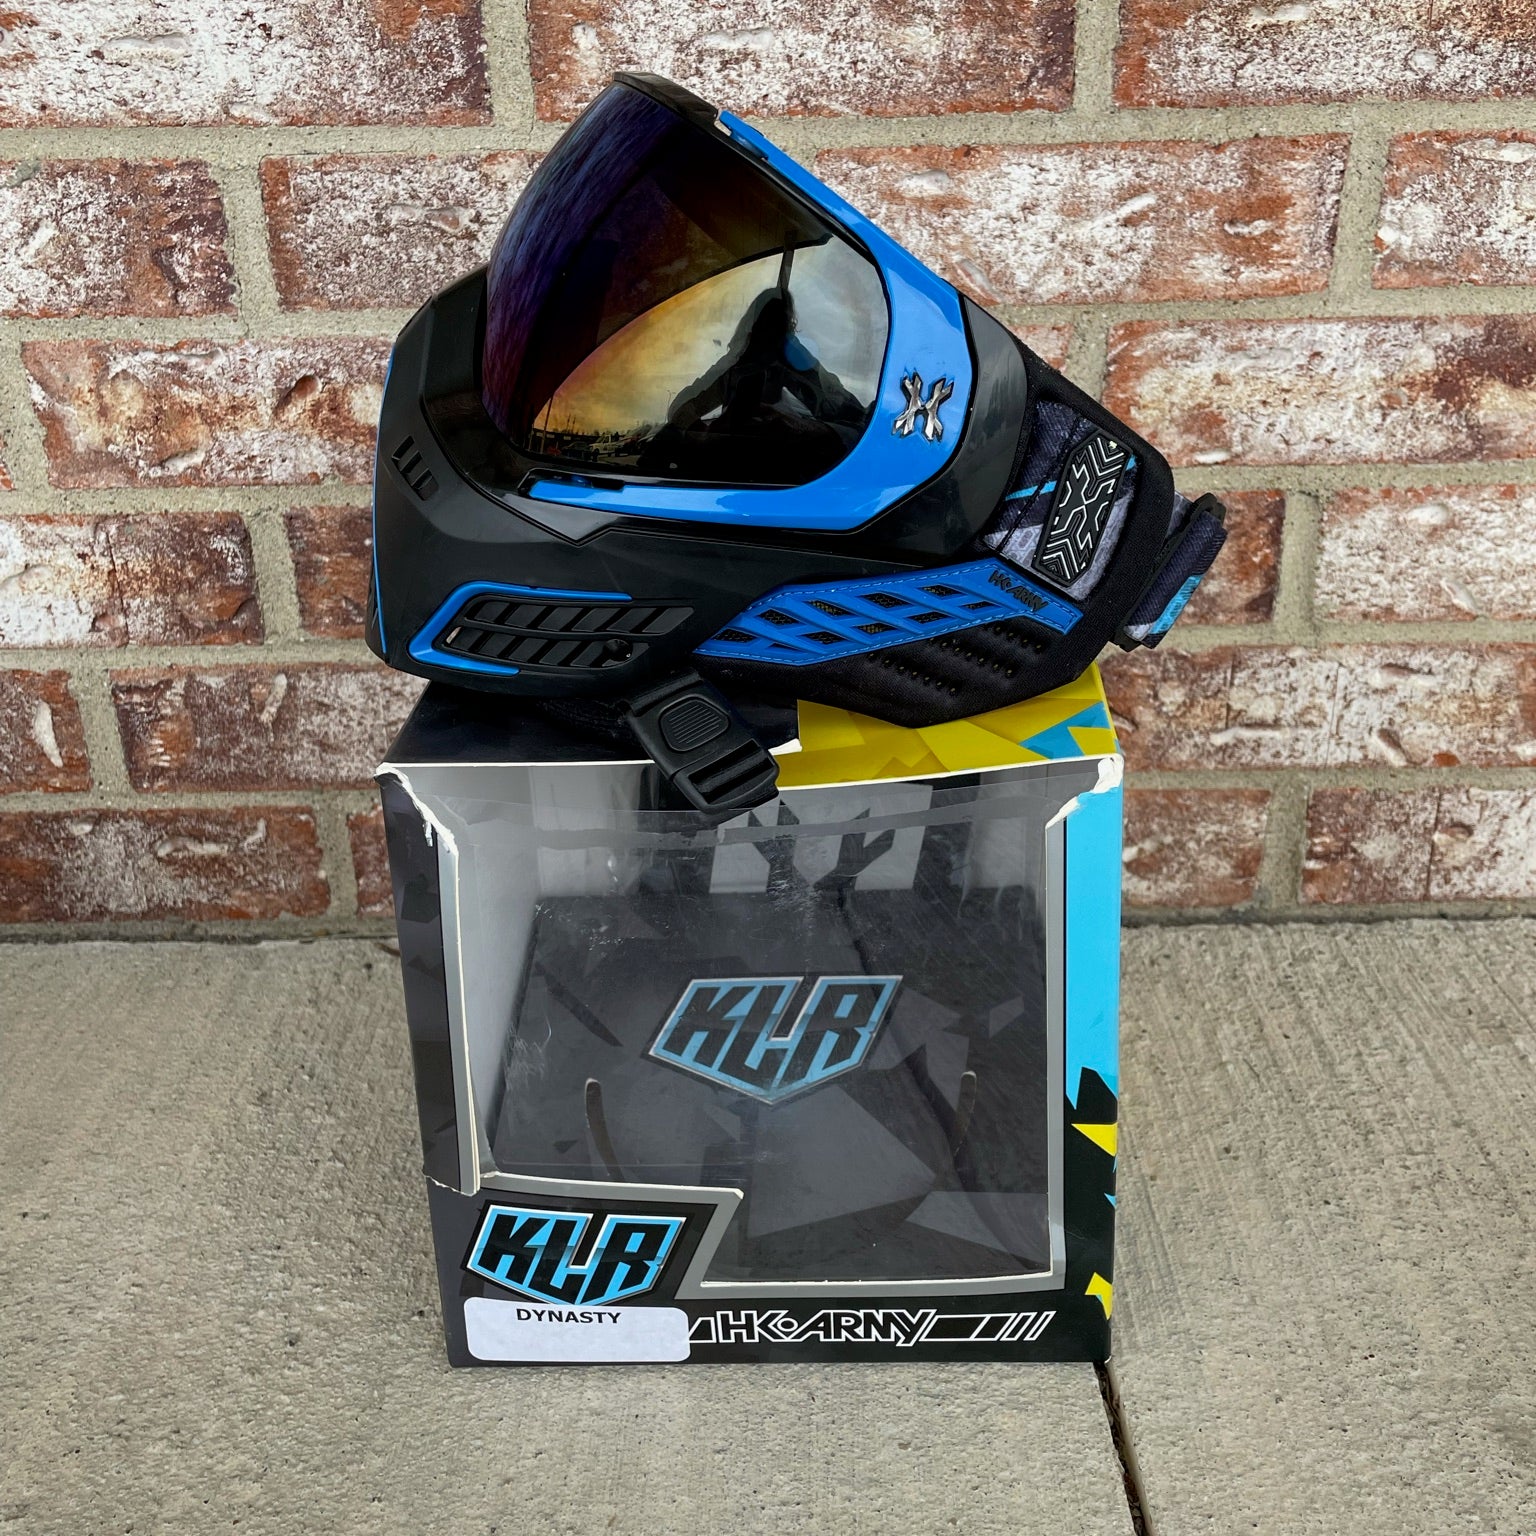 Used HK Army KLR Paintball Mask - Dynasty (Black with Blue Accents)